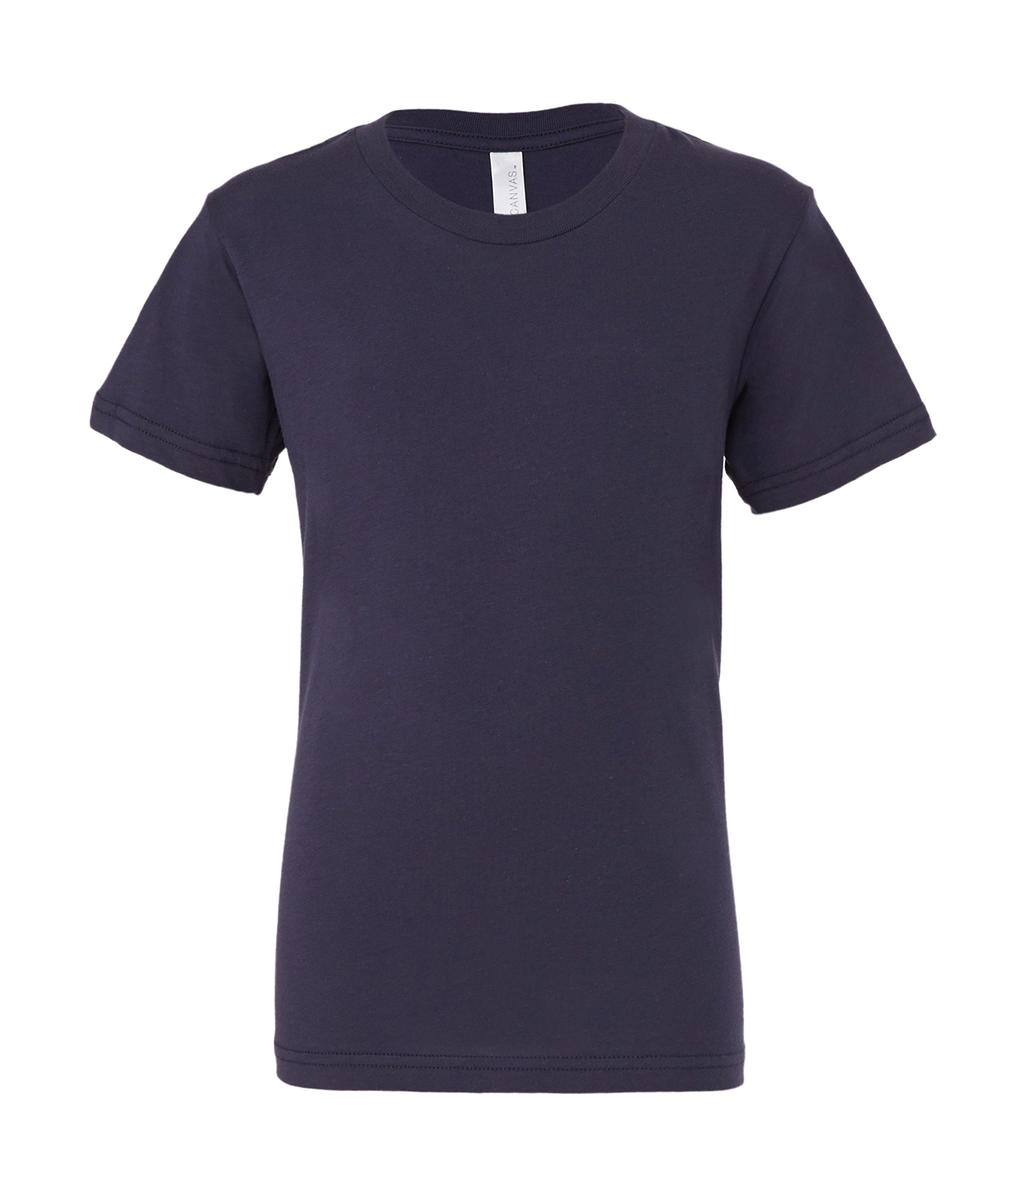  Youth Jersey Short Sleeve Tee in Farbe Navy